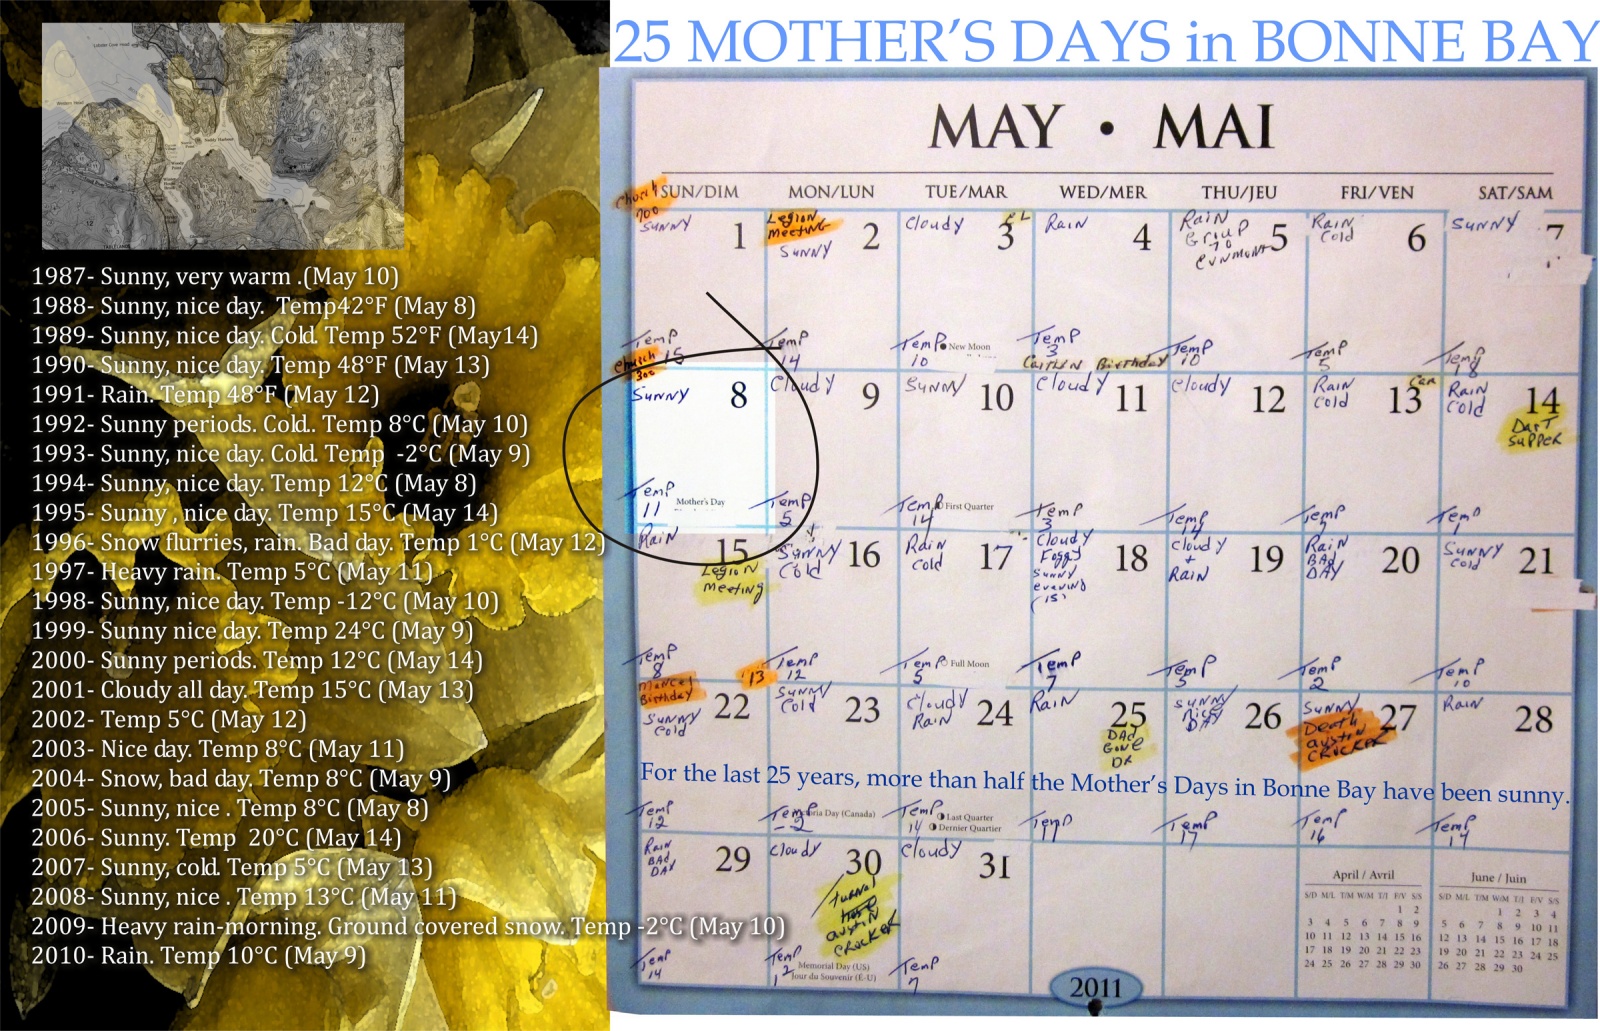 25 Mother’s Days in Bonne Bay